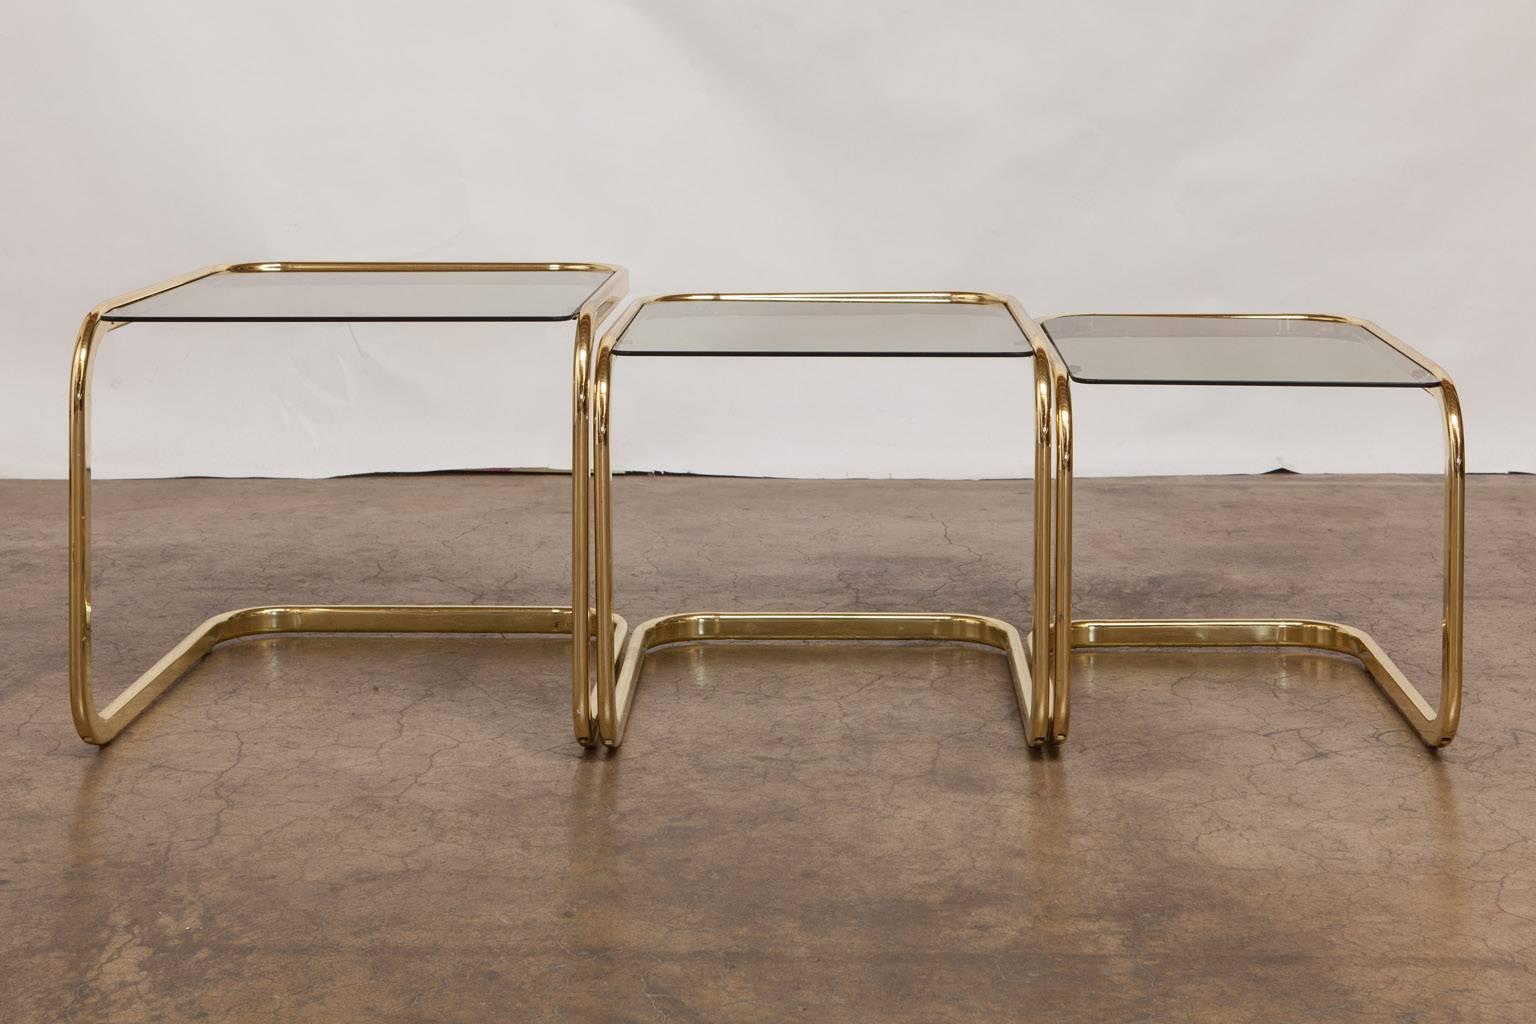 Hollywood Regency Set of Three Brass and Glass Nesting Tables by Milo Baughman